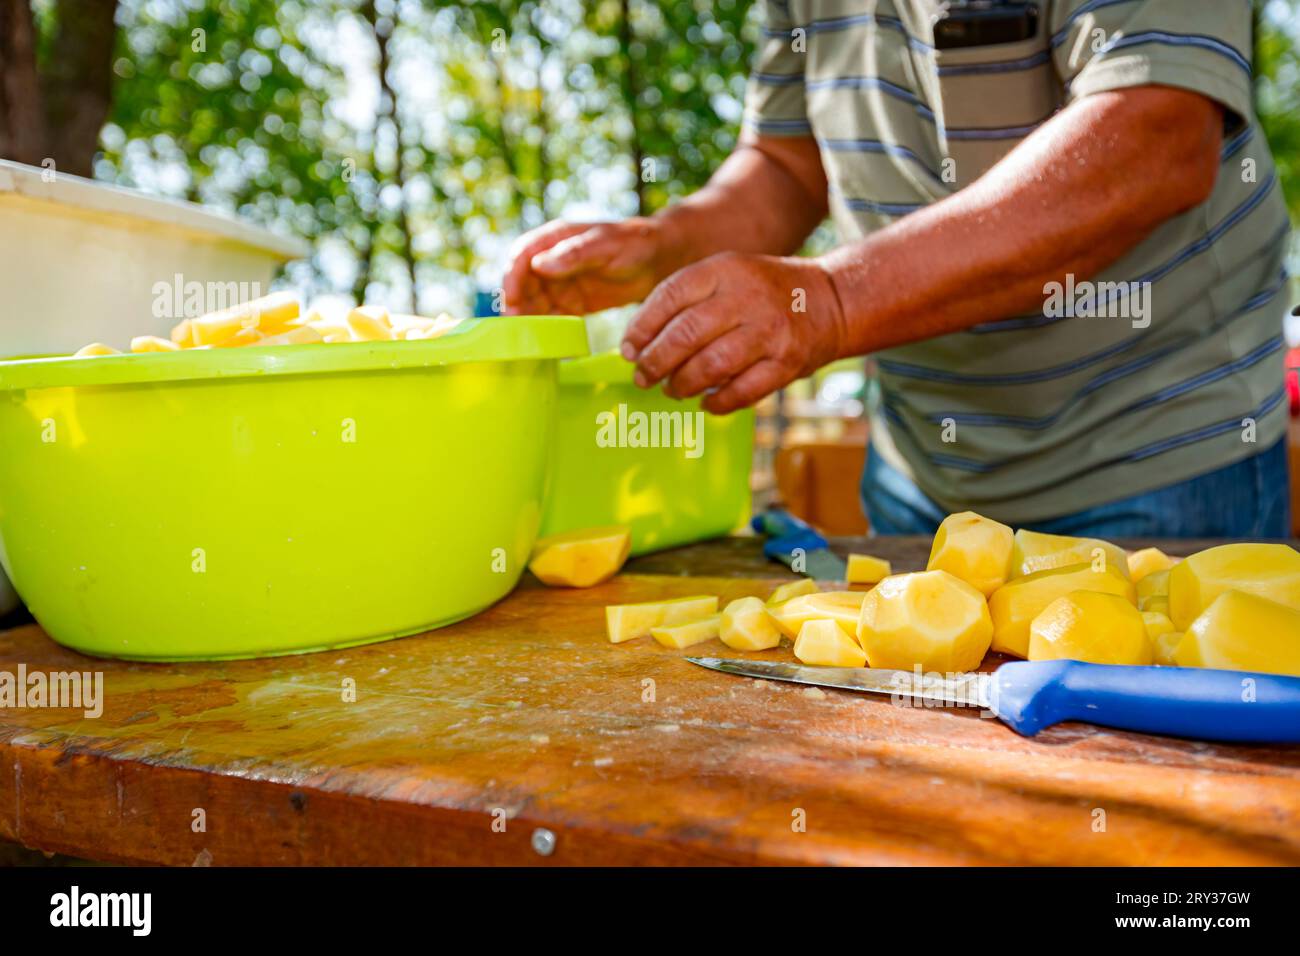 https://c8.alamy.com/comp/2RY37GW/an-elderly-farmer-cooker-cuts-potatoes-using-knife-into-slices-on-the-wooden-board-prepares-it-for-cooking-at-the-outdoor-bowls-are-full-of-cut-vege-2RY37GW.jpg